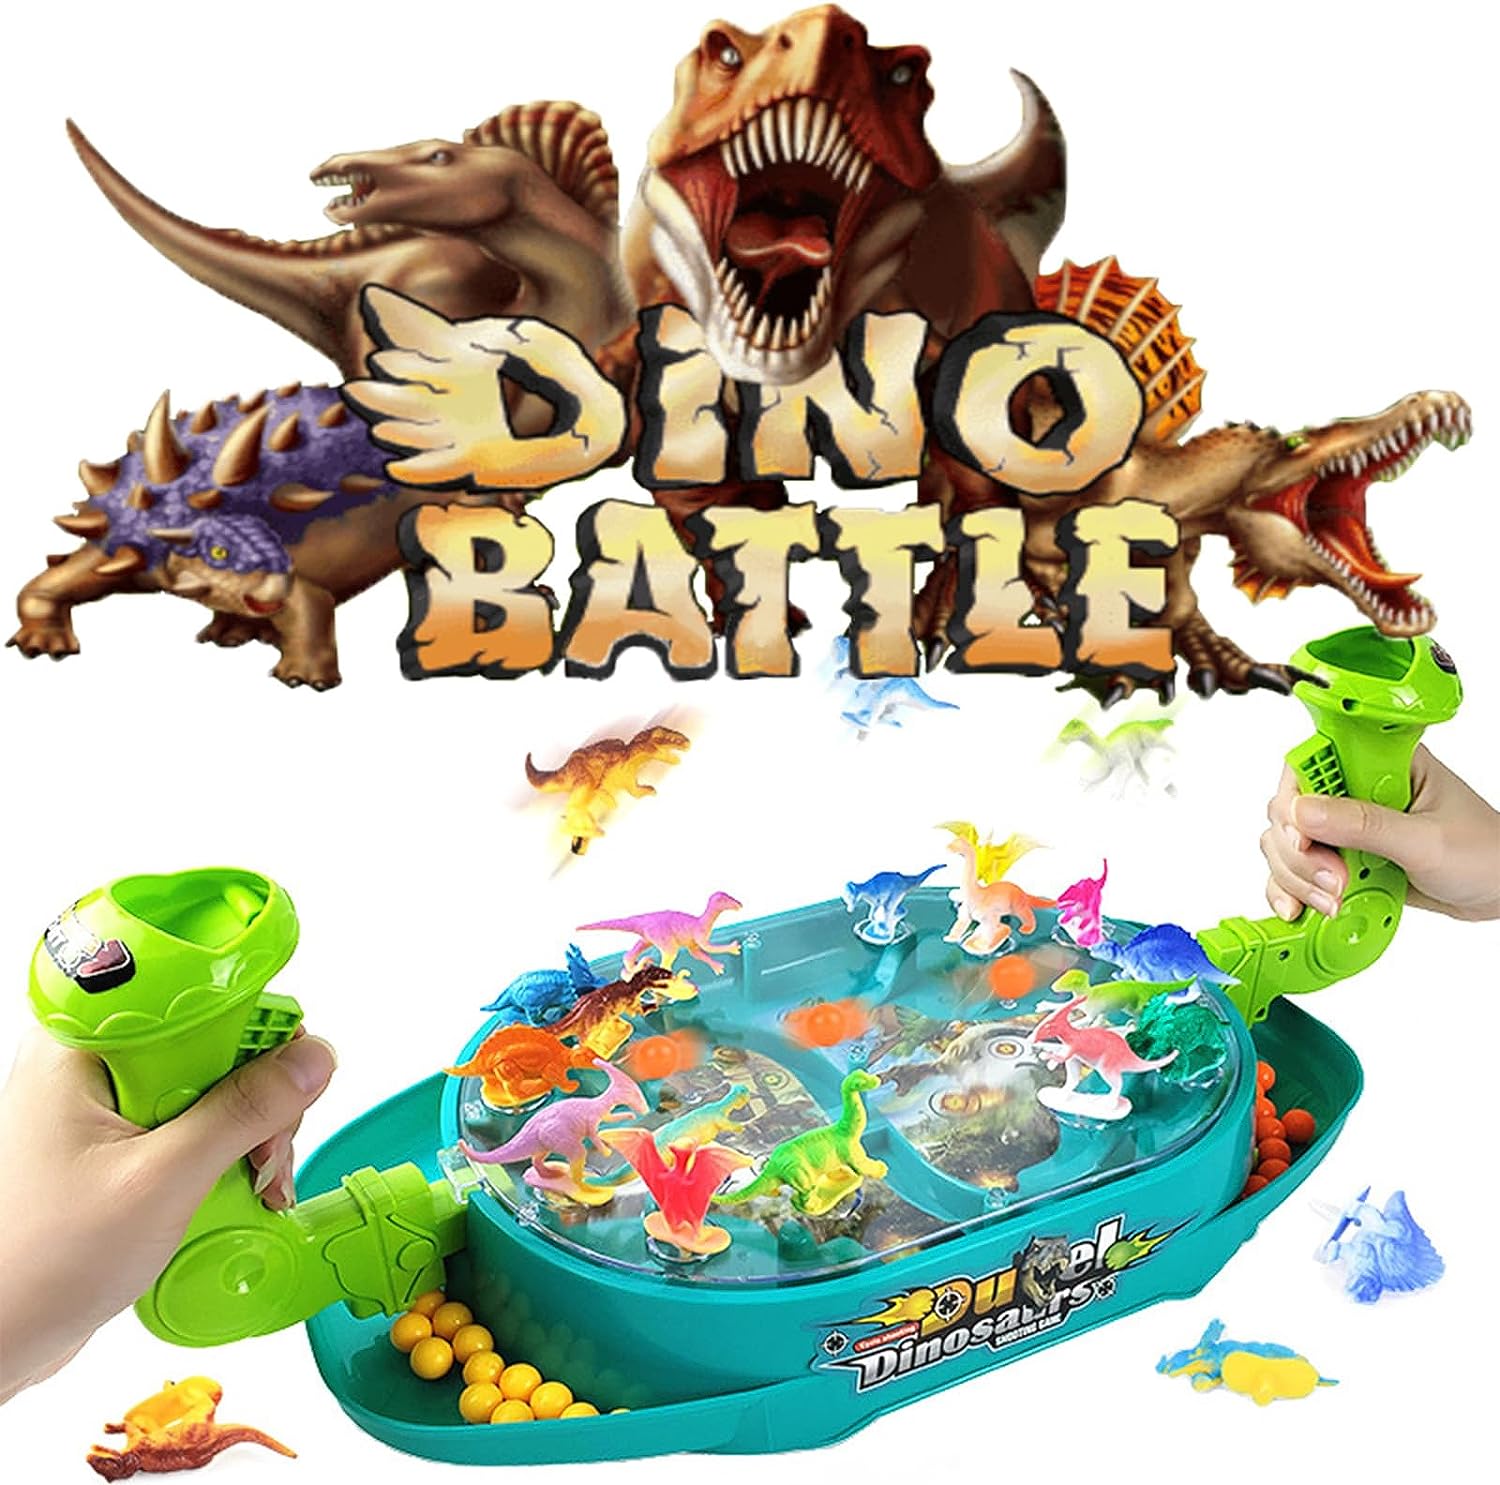 Dinosaur Shooting Toys.Dinosaur Game Battle Toy with Board Games and Dragon Toys for Kids - Perfect Boys Party Games and Great Fun Gifts for Childrens 4 5 6 7 8 Year Old